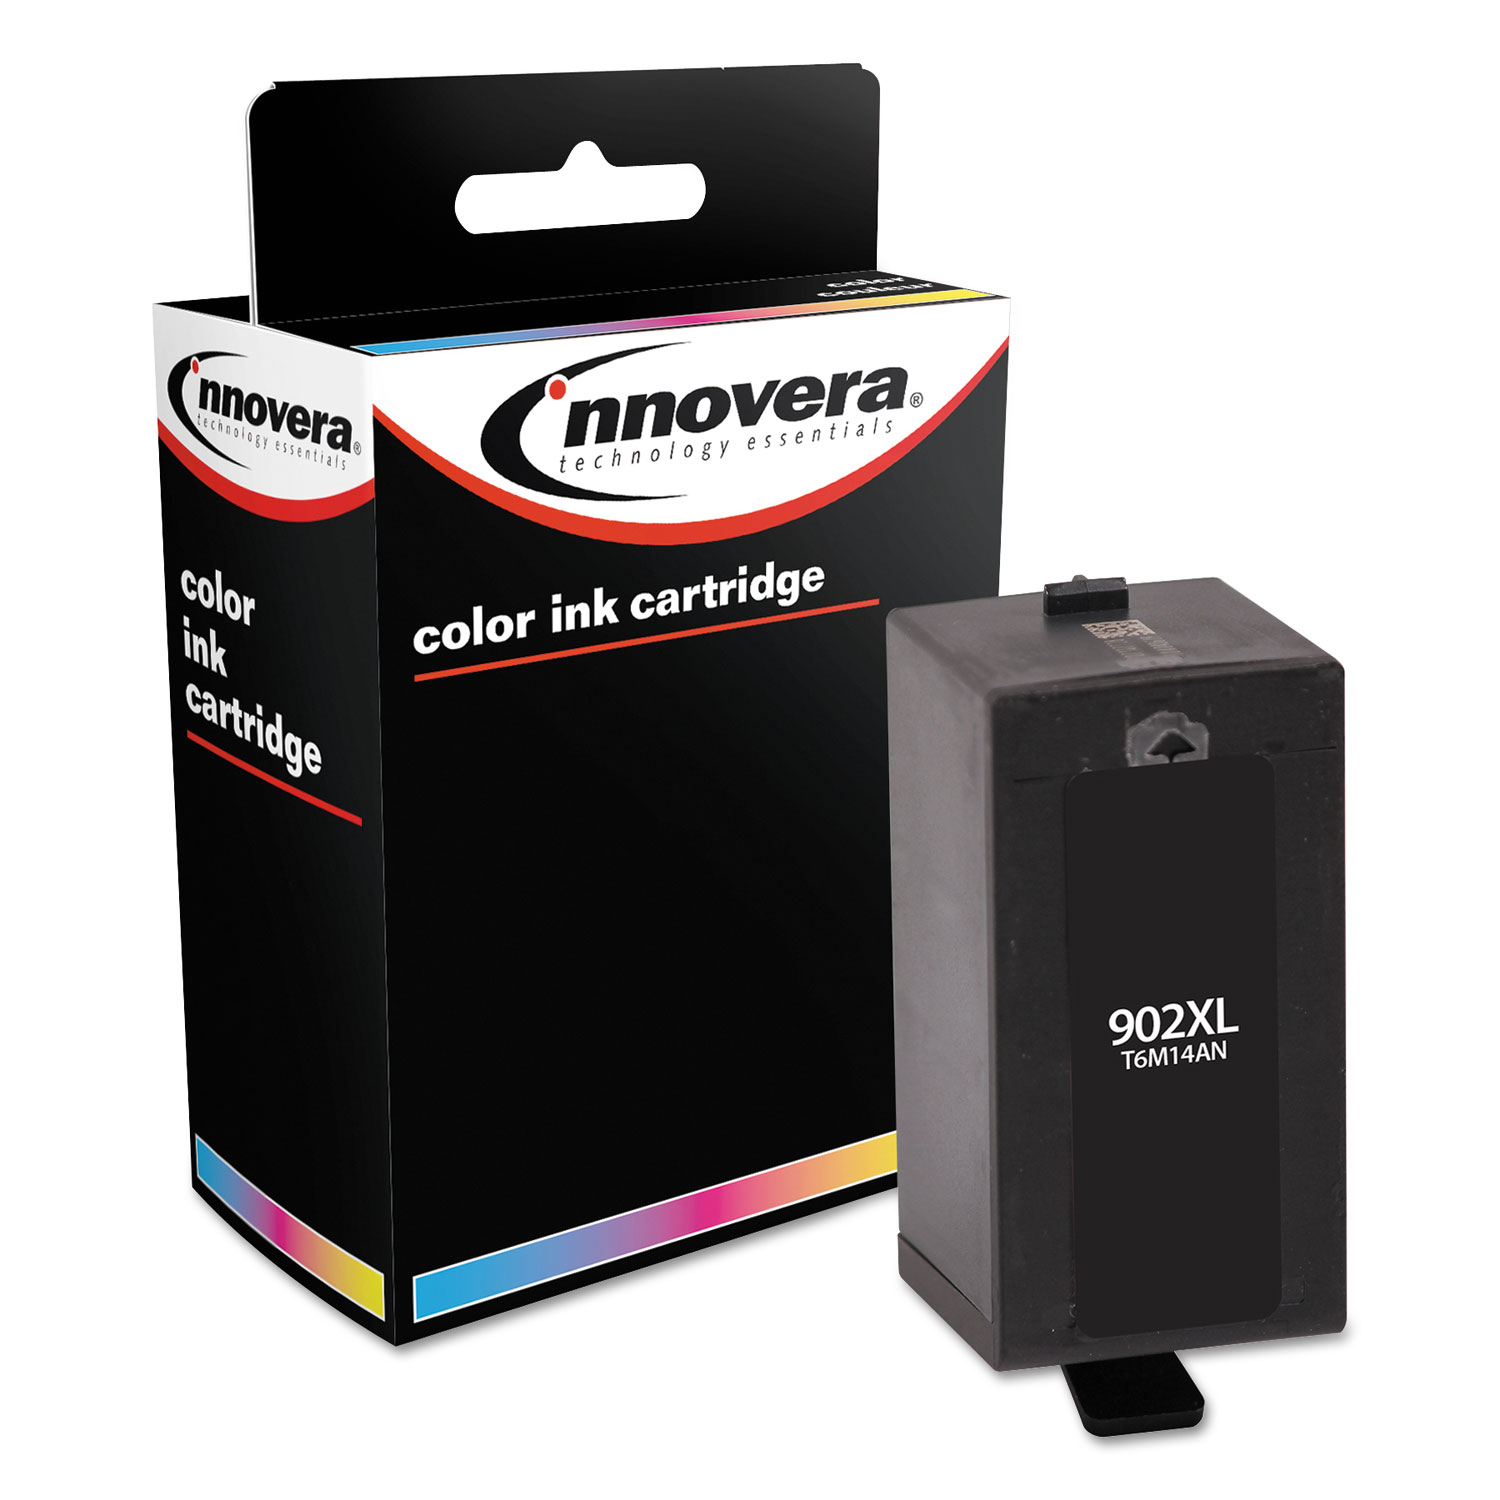  Innovera IVR902XLB Remanufactured T6M14AN (902XL) High-Yield Ink, 825 Page-Yield, Black (IVR902XLB) 